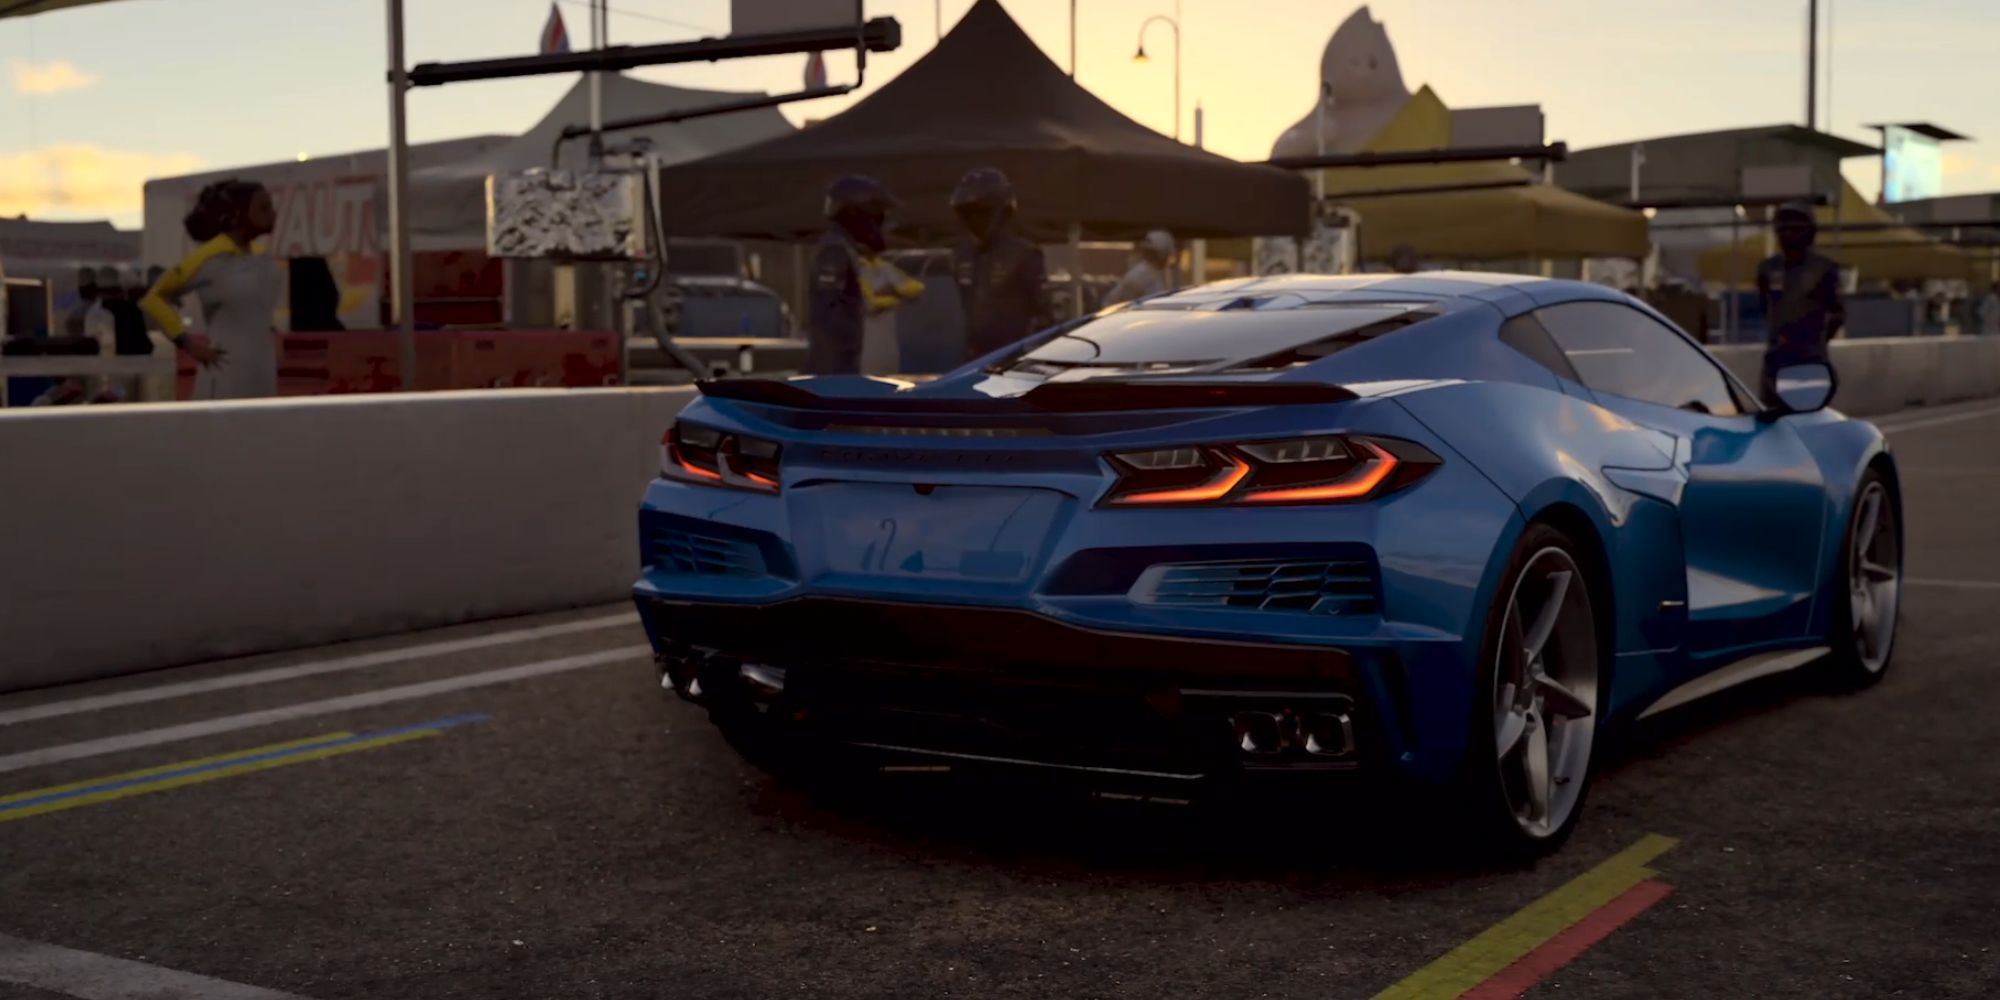 Watch Forza Motorsport official launch trailer here